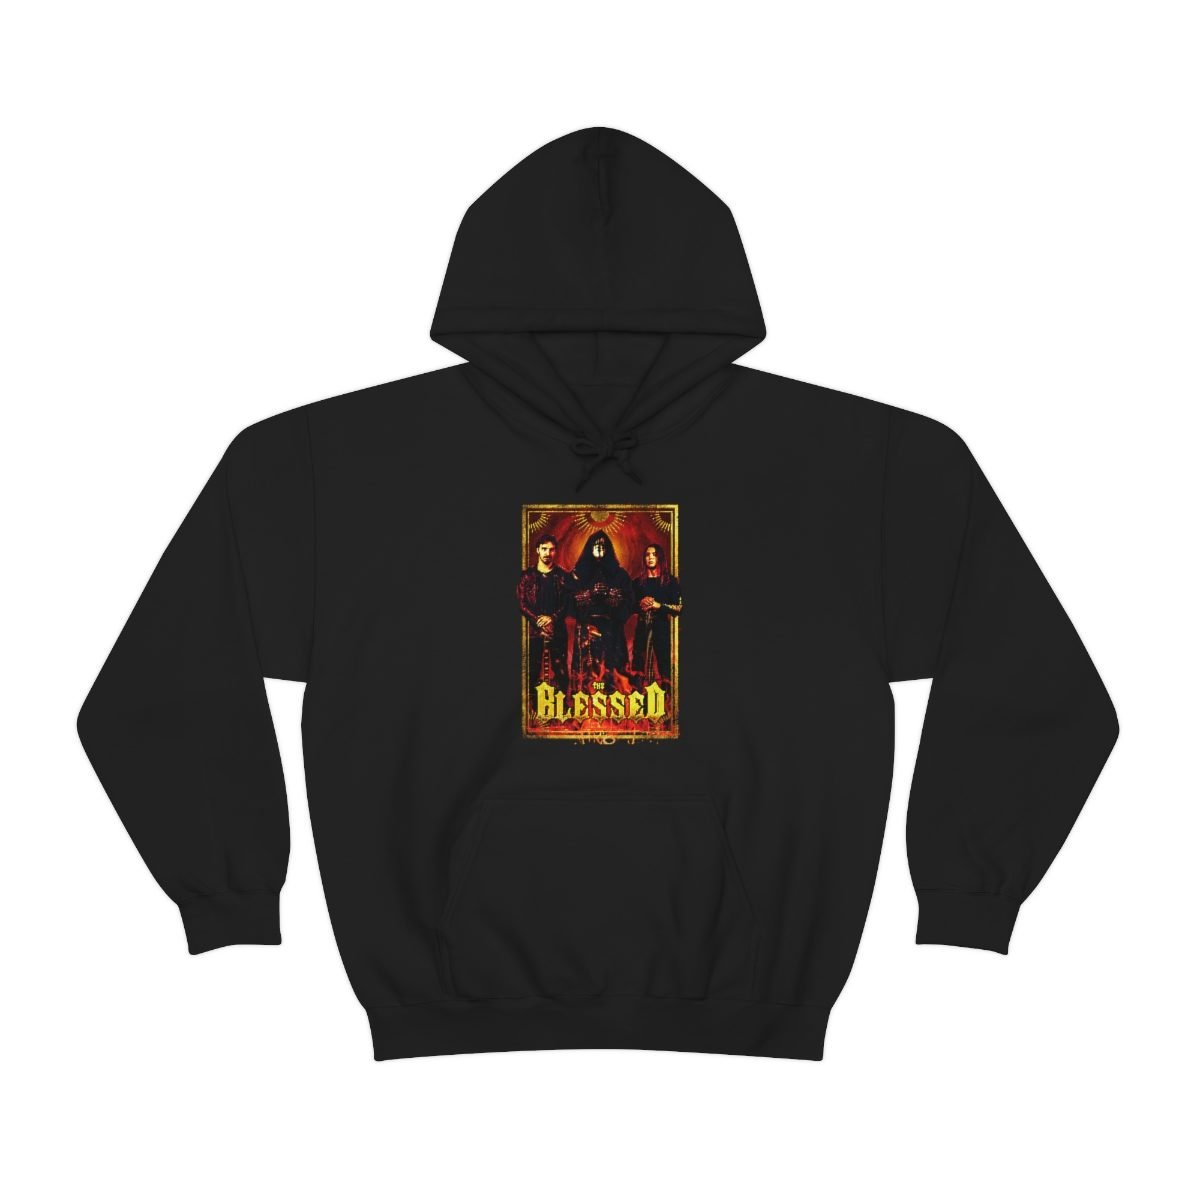 The Blessed Band Photo Pullover Hooded Sweatshirt